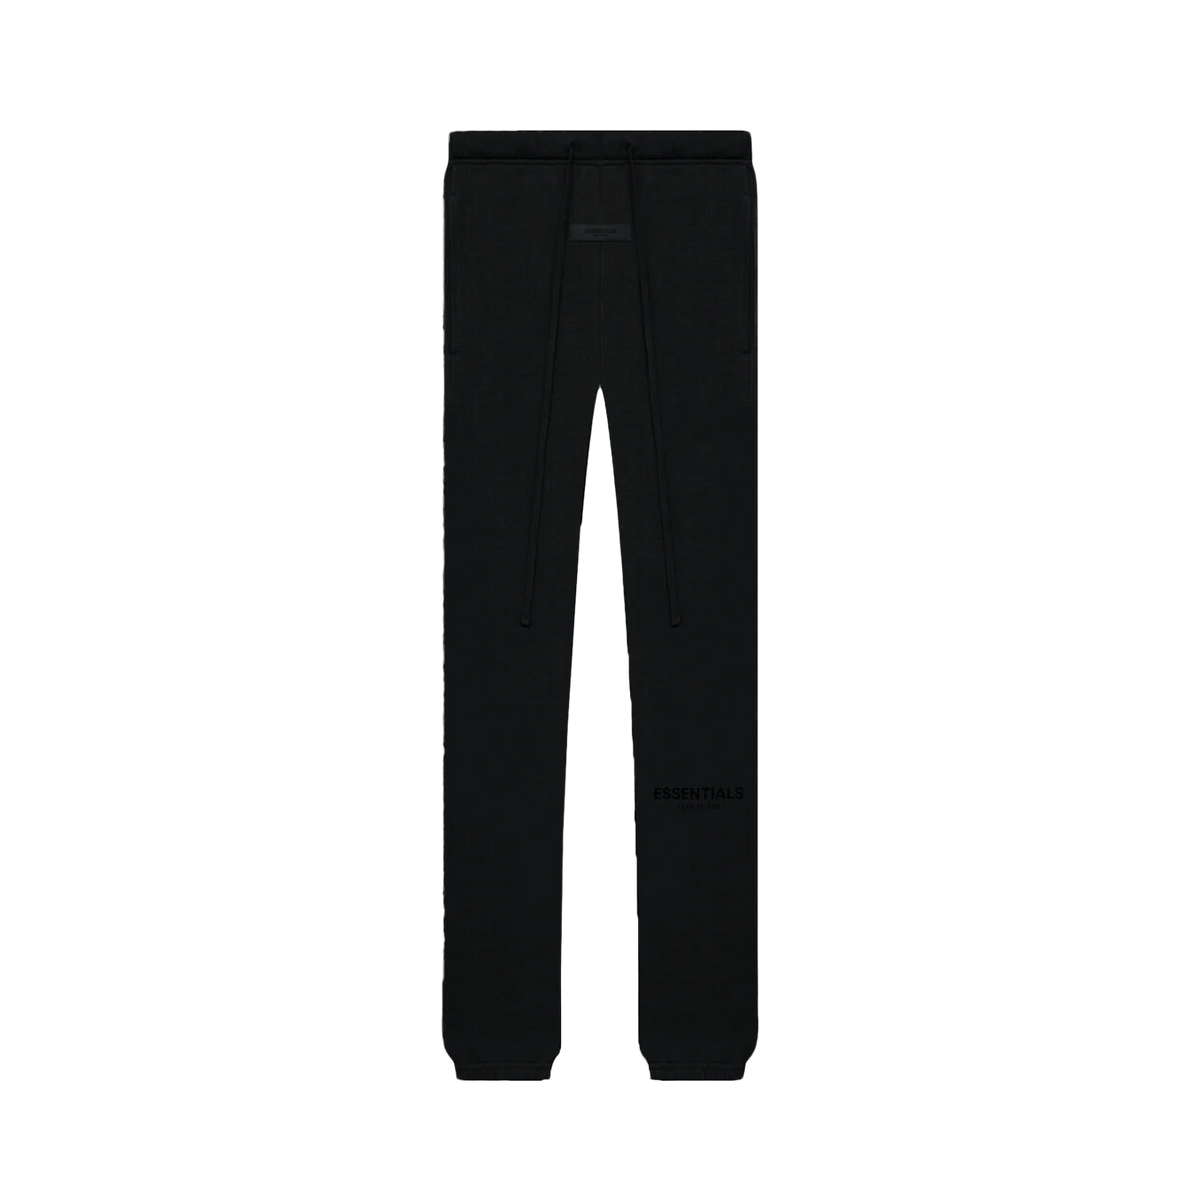 Fear of God Essentials Sweatpants 'Stretch Limo' (SS22) - Kick Game